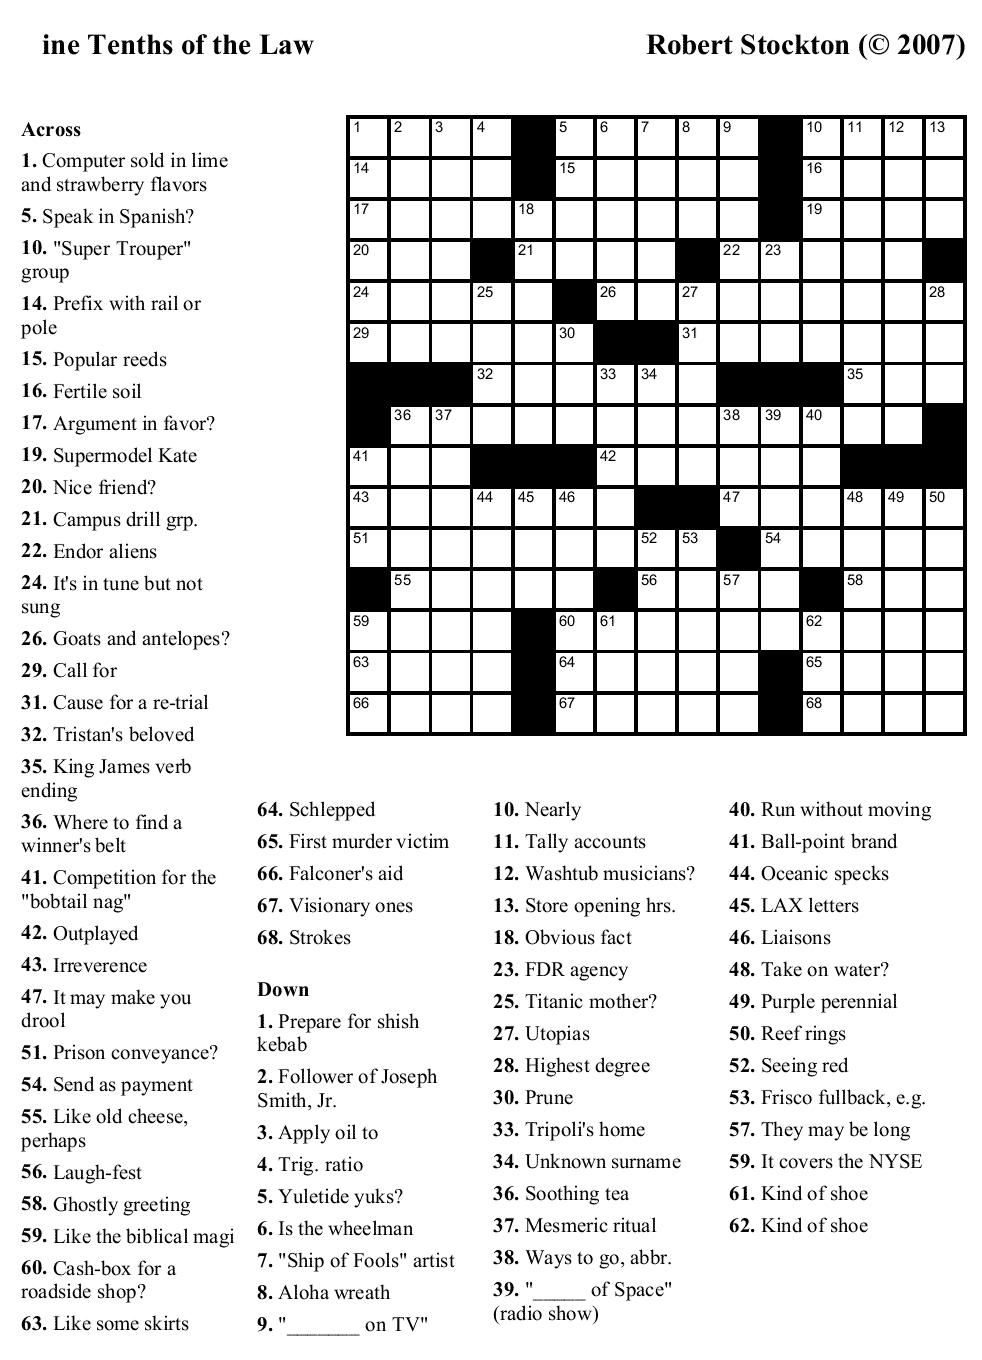 Crossword Puzzles Printable - Yahoo Image Search Results | Crossword - Christmas Themed Crossword Puzzles Printable